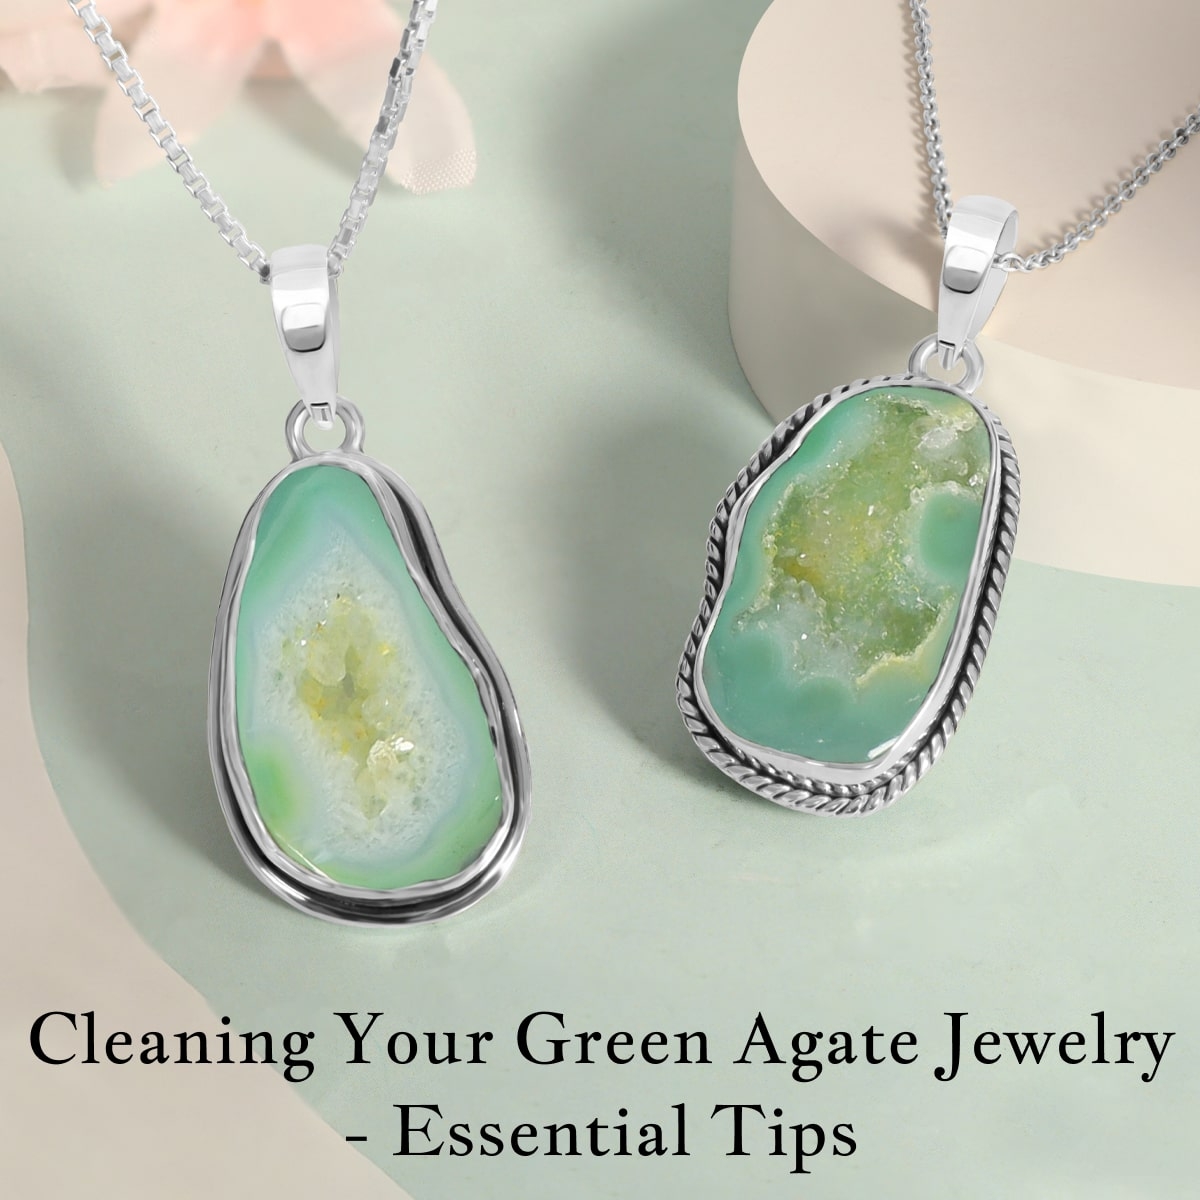 How to Clean Your Green Agate Jewelry